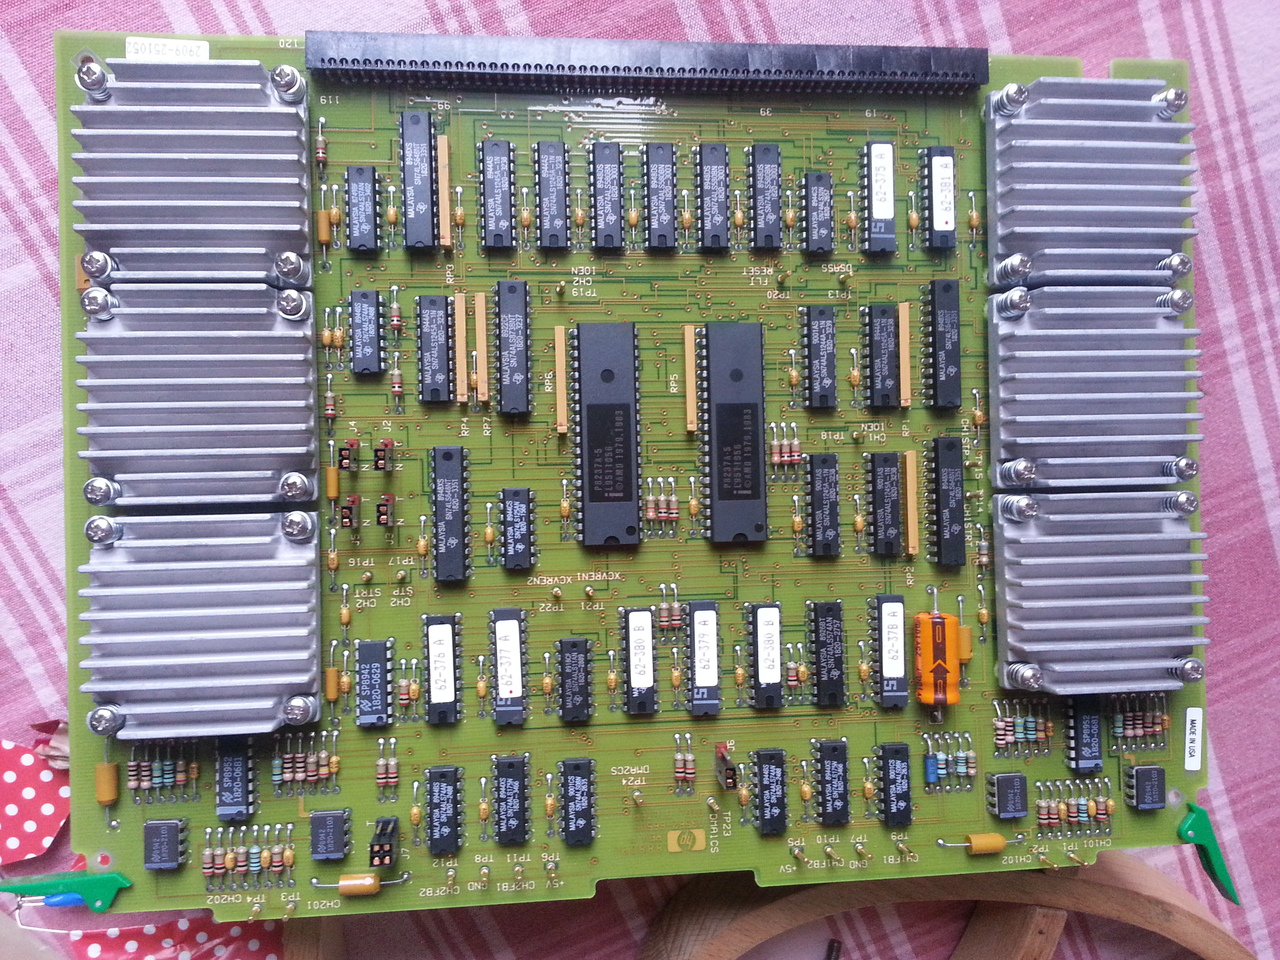 Picture of the A5 Digital Filter board